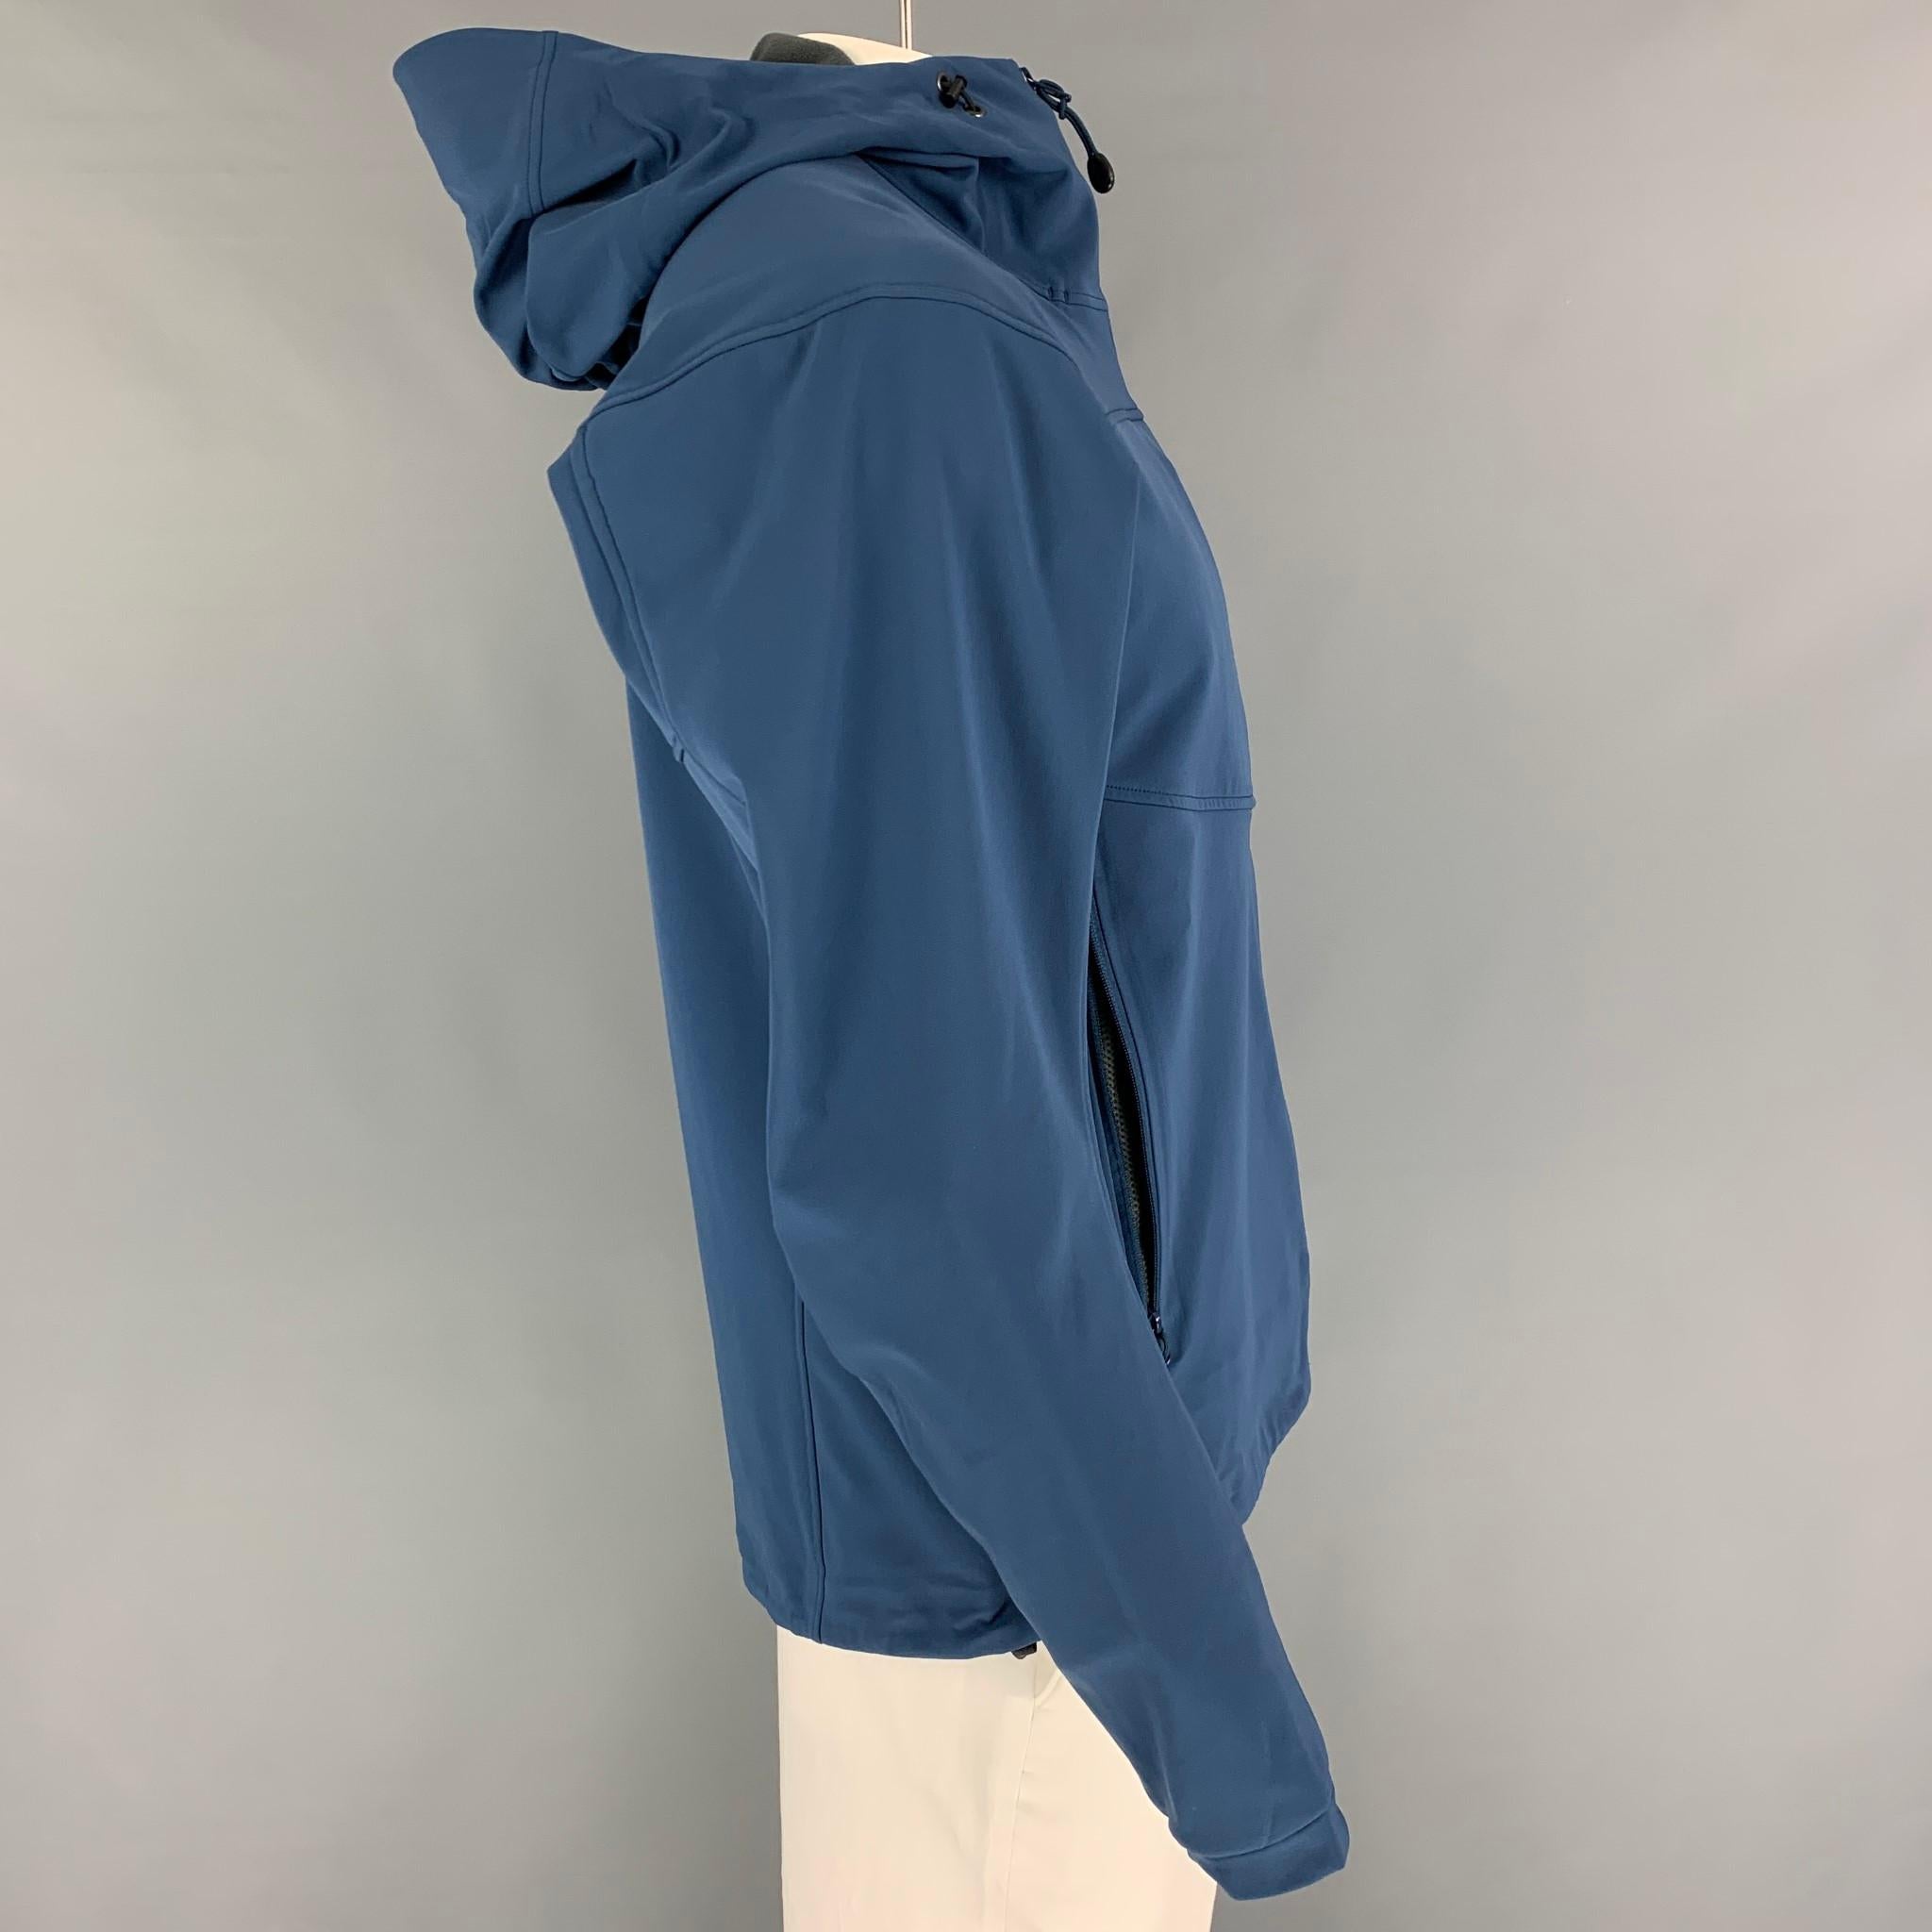 ARCTERYX jacket comes in a blue nylon blend with a grey fleece liner featuring a hooded style, front pockets, sleeve pocket, and a full zip up closure. 

Very Good Pre-Owned Condition.
Marked: L
Original Retail Price: